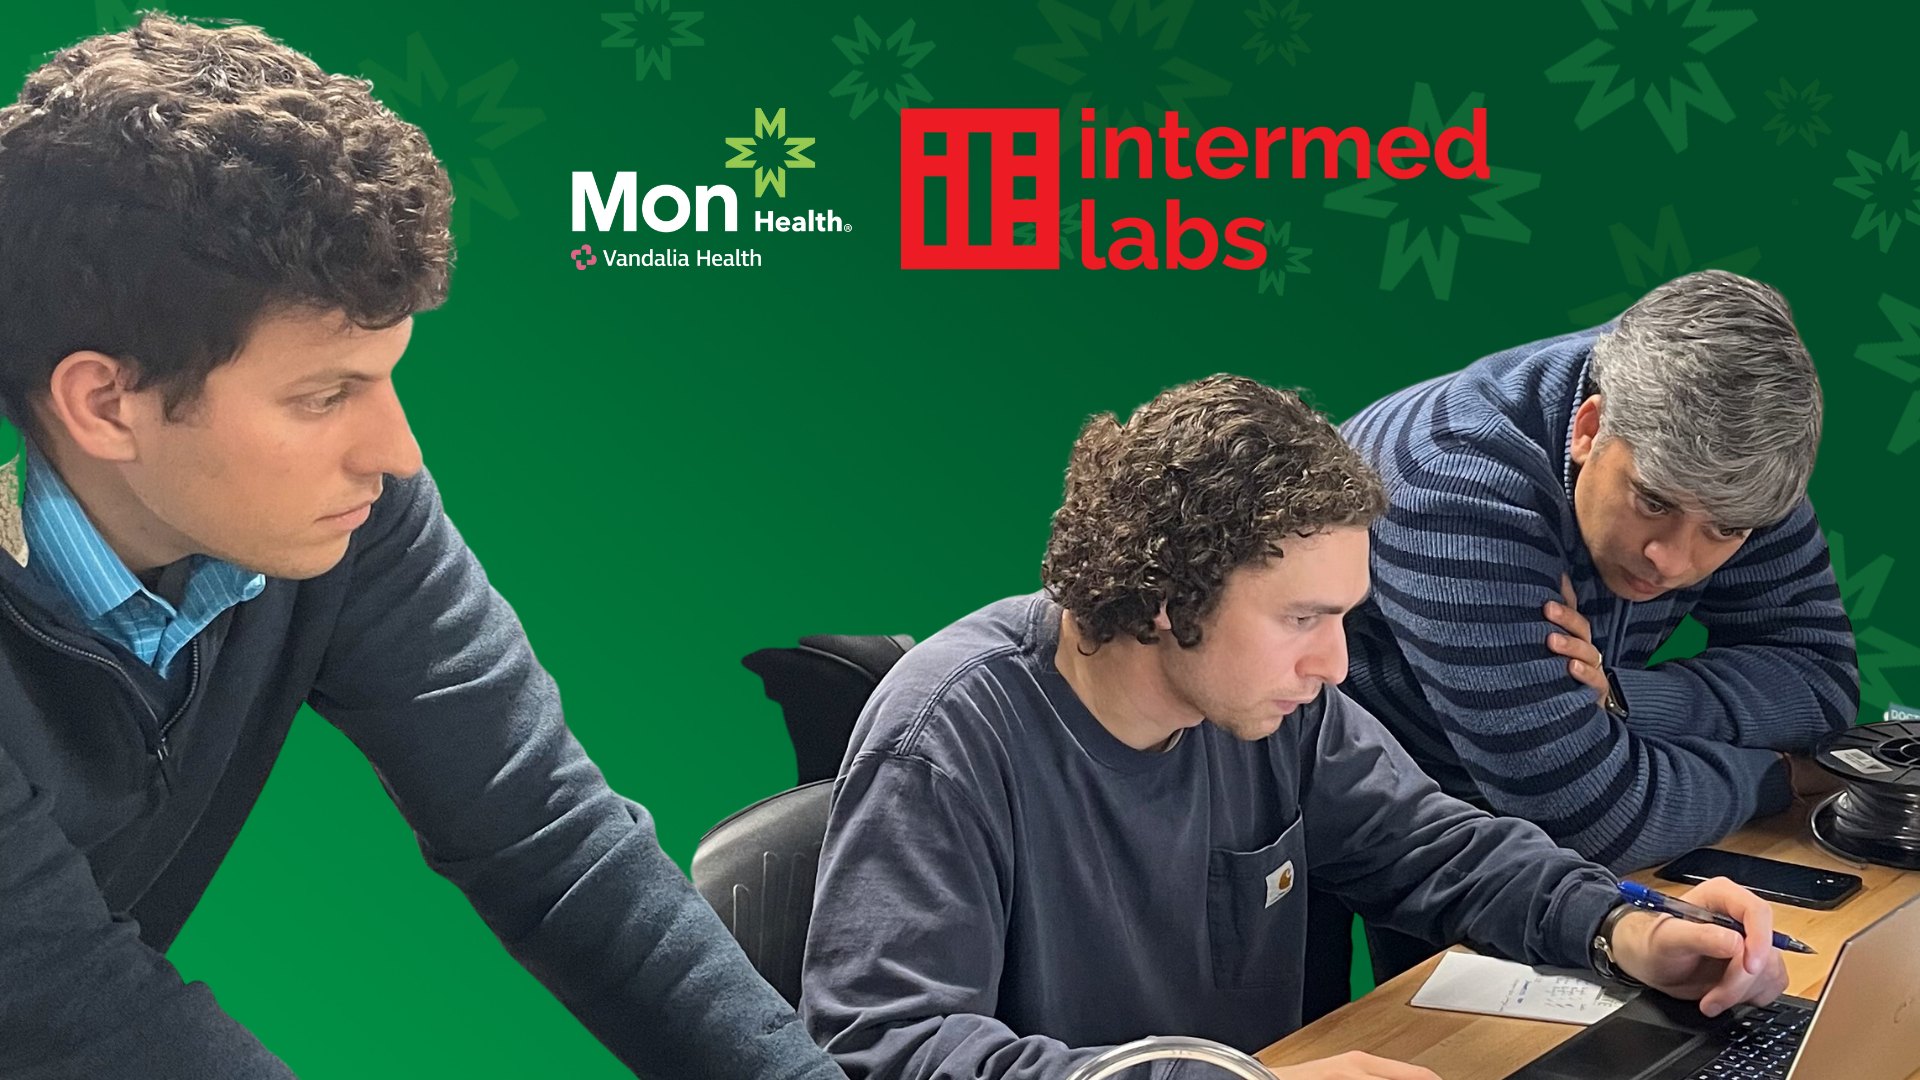 Mon Health System and Intermed Labs Partnership Results in Successful Commercial Exit of Innovative Technology